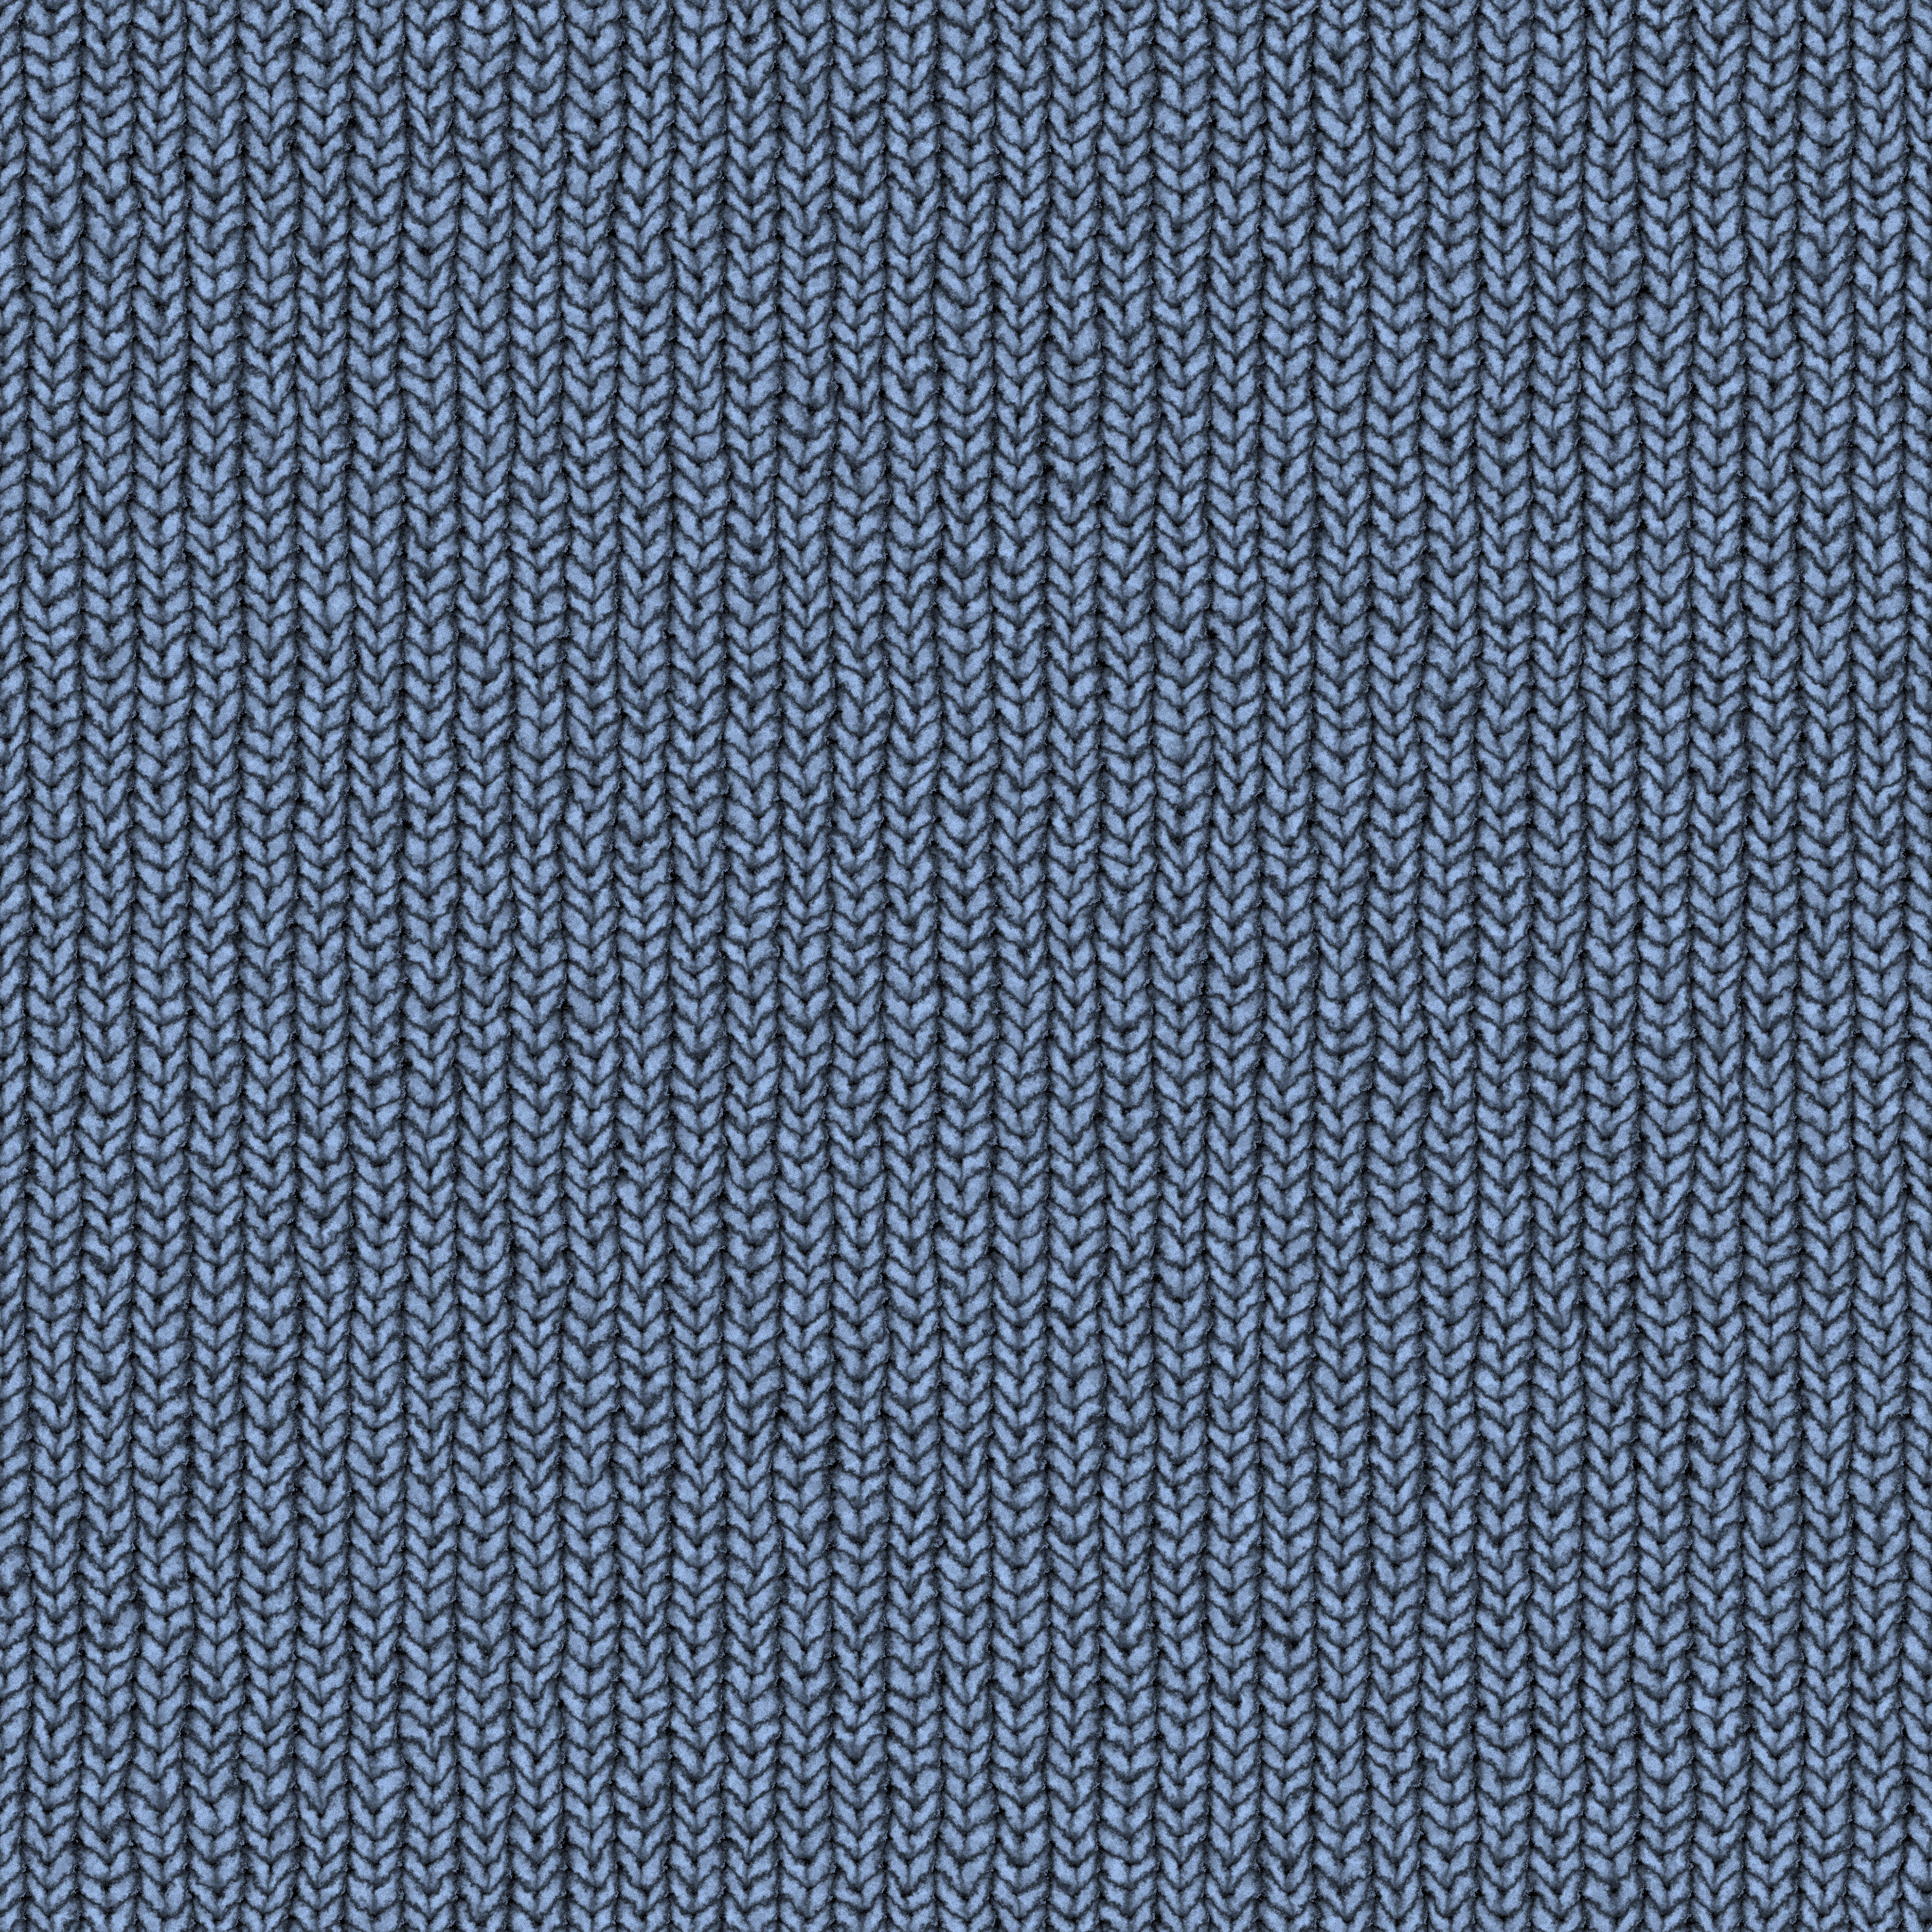 wool texture with great pattern as a seamless background | www ...